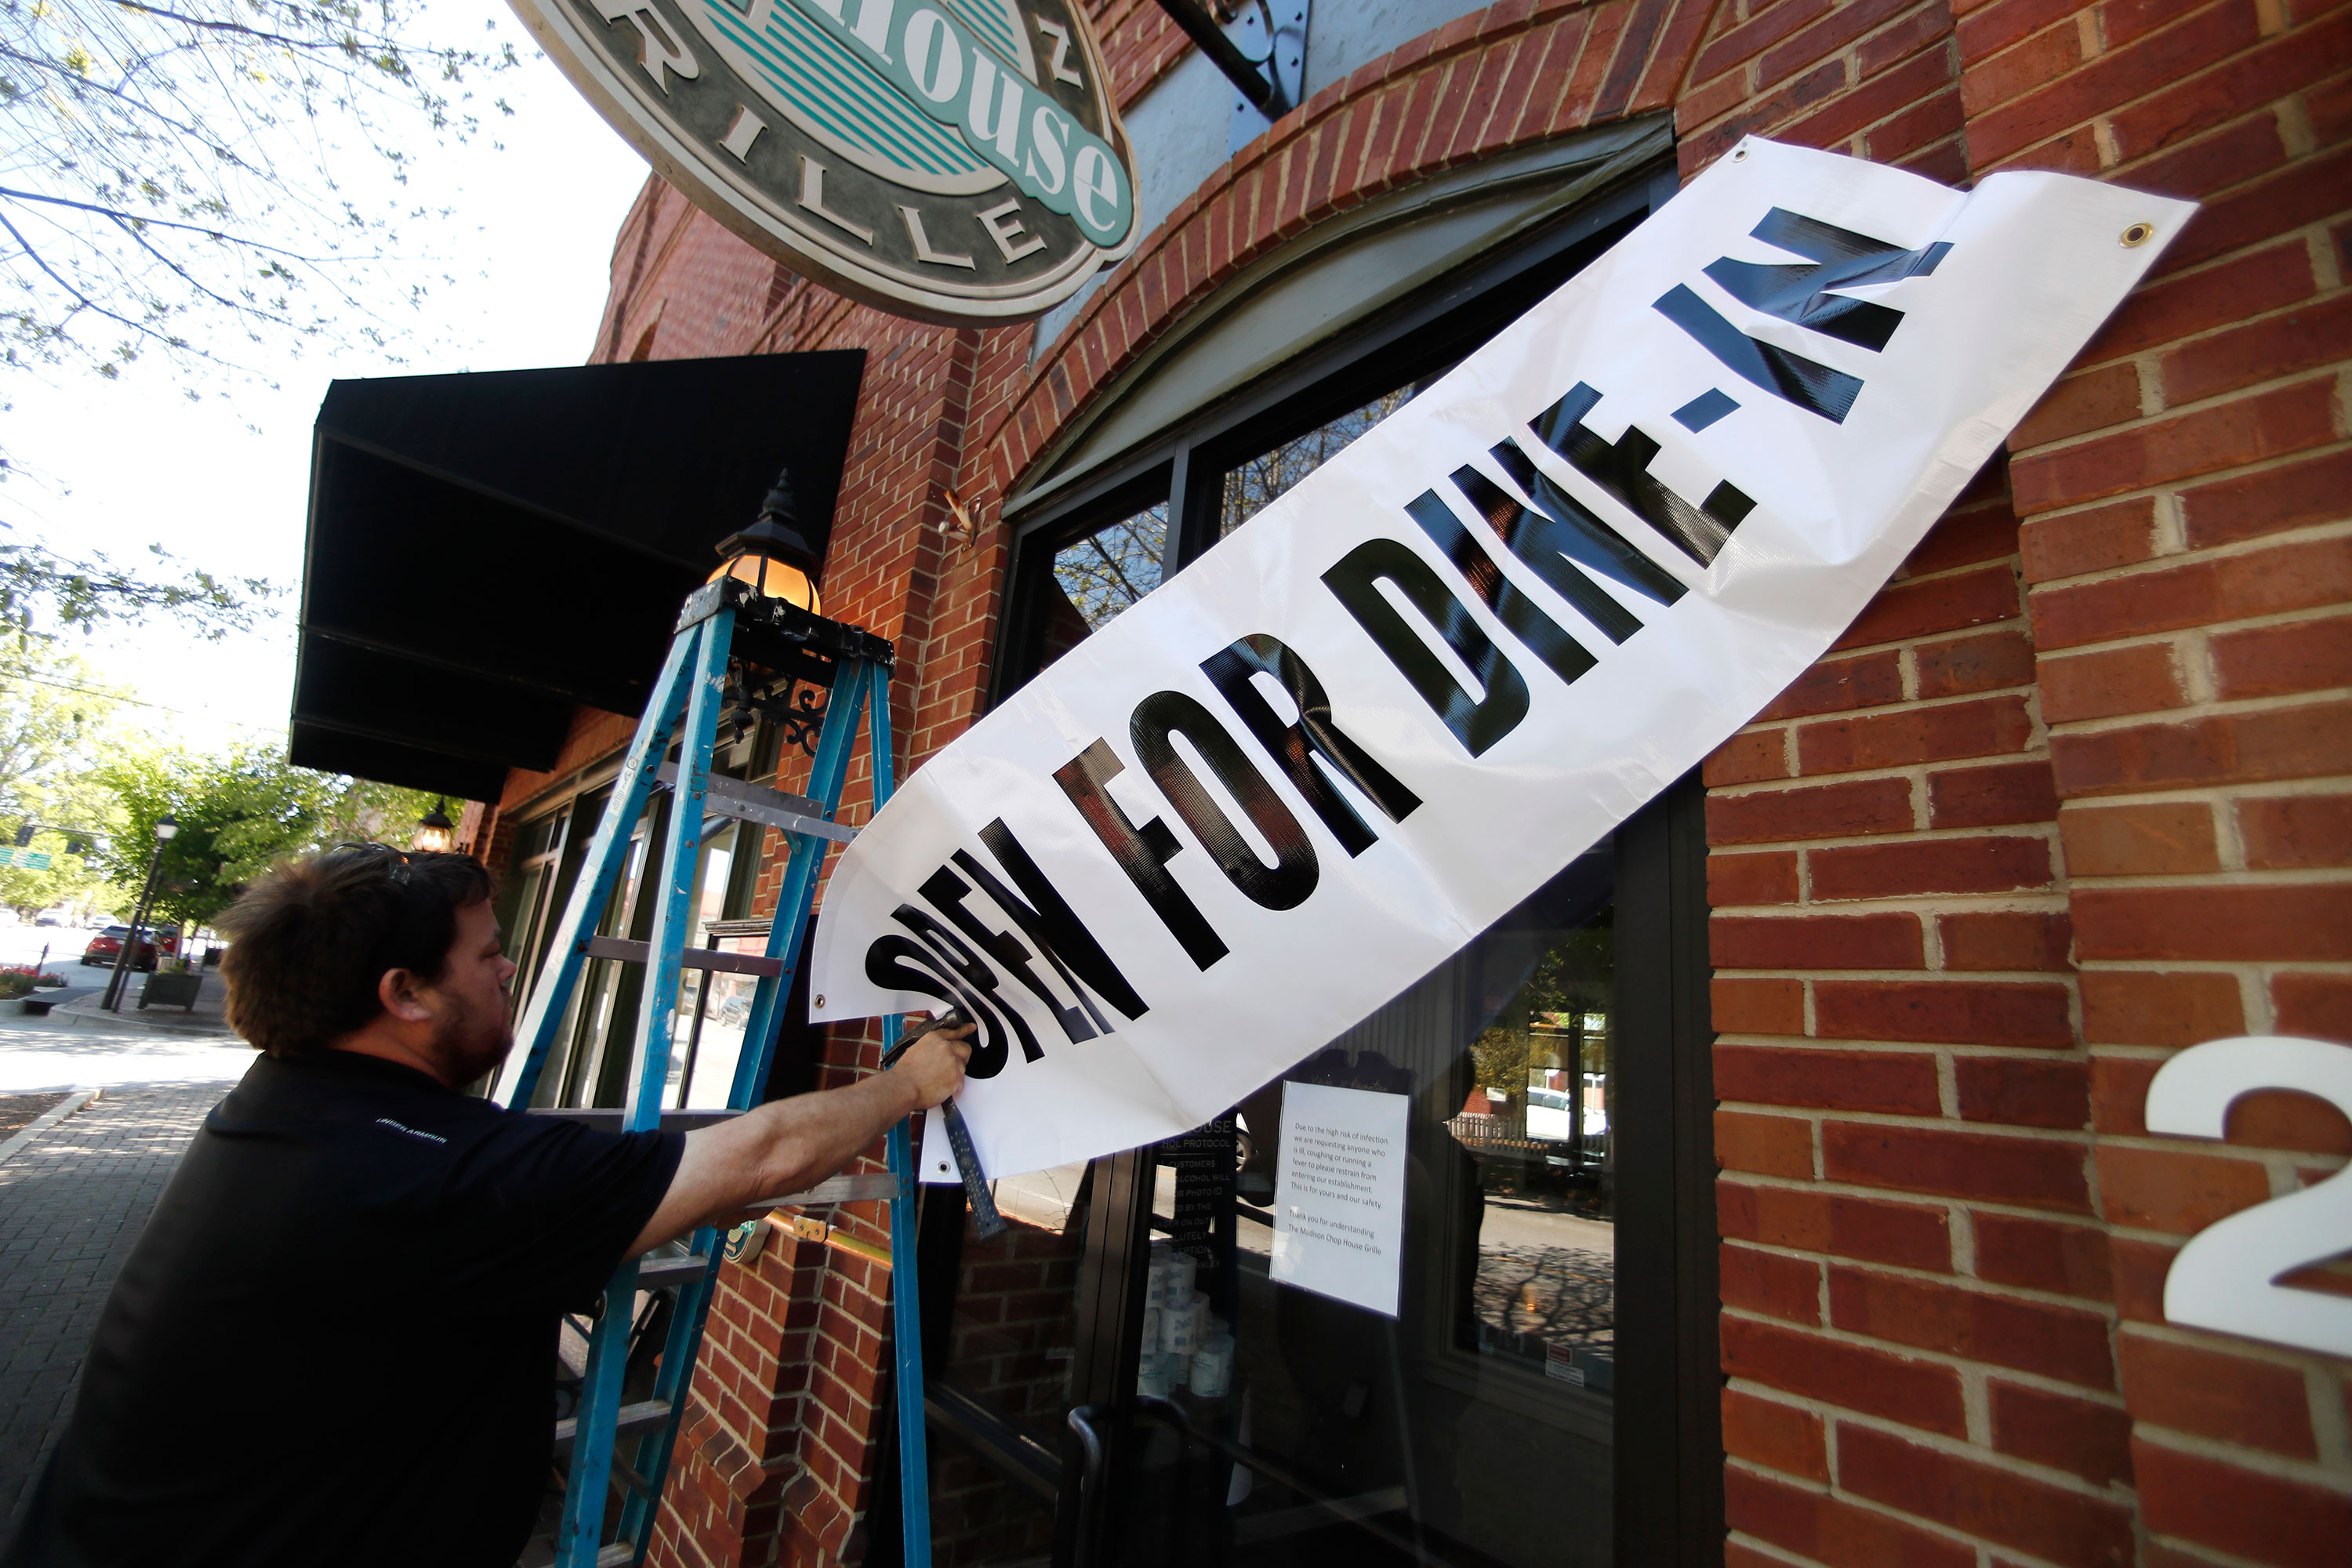 Jason Godbey hangs a banner over the entrance of Madison Chop House as they prepare to shift from take out only to dine-in service on April 27 in Madison, Georgia.